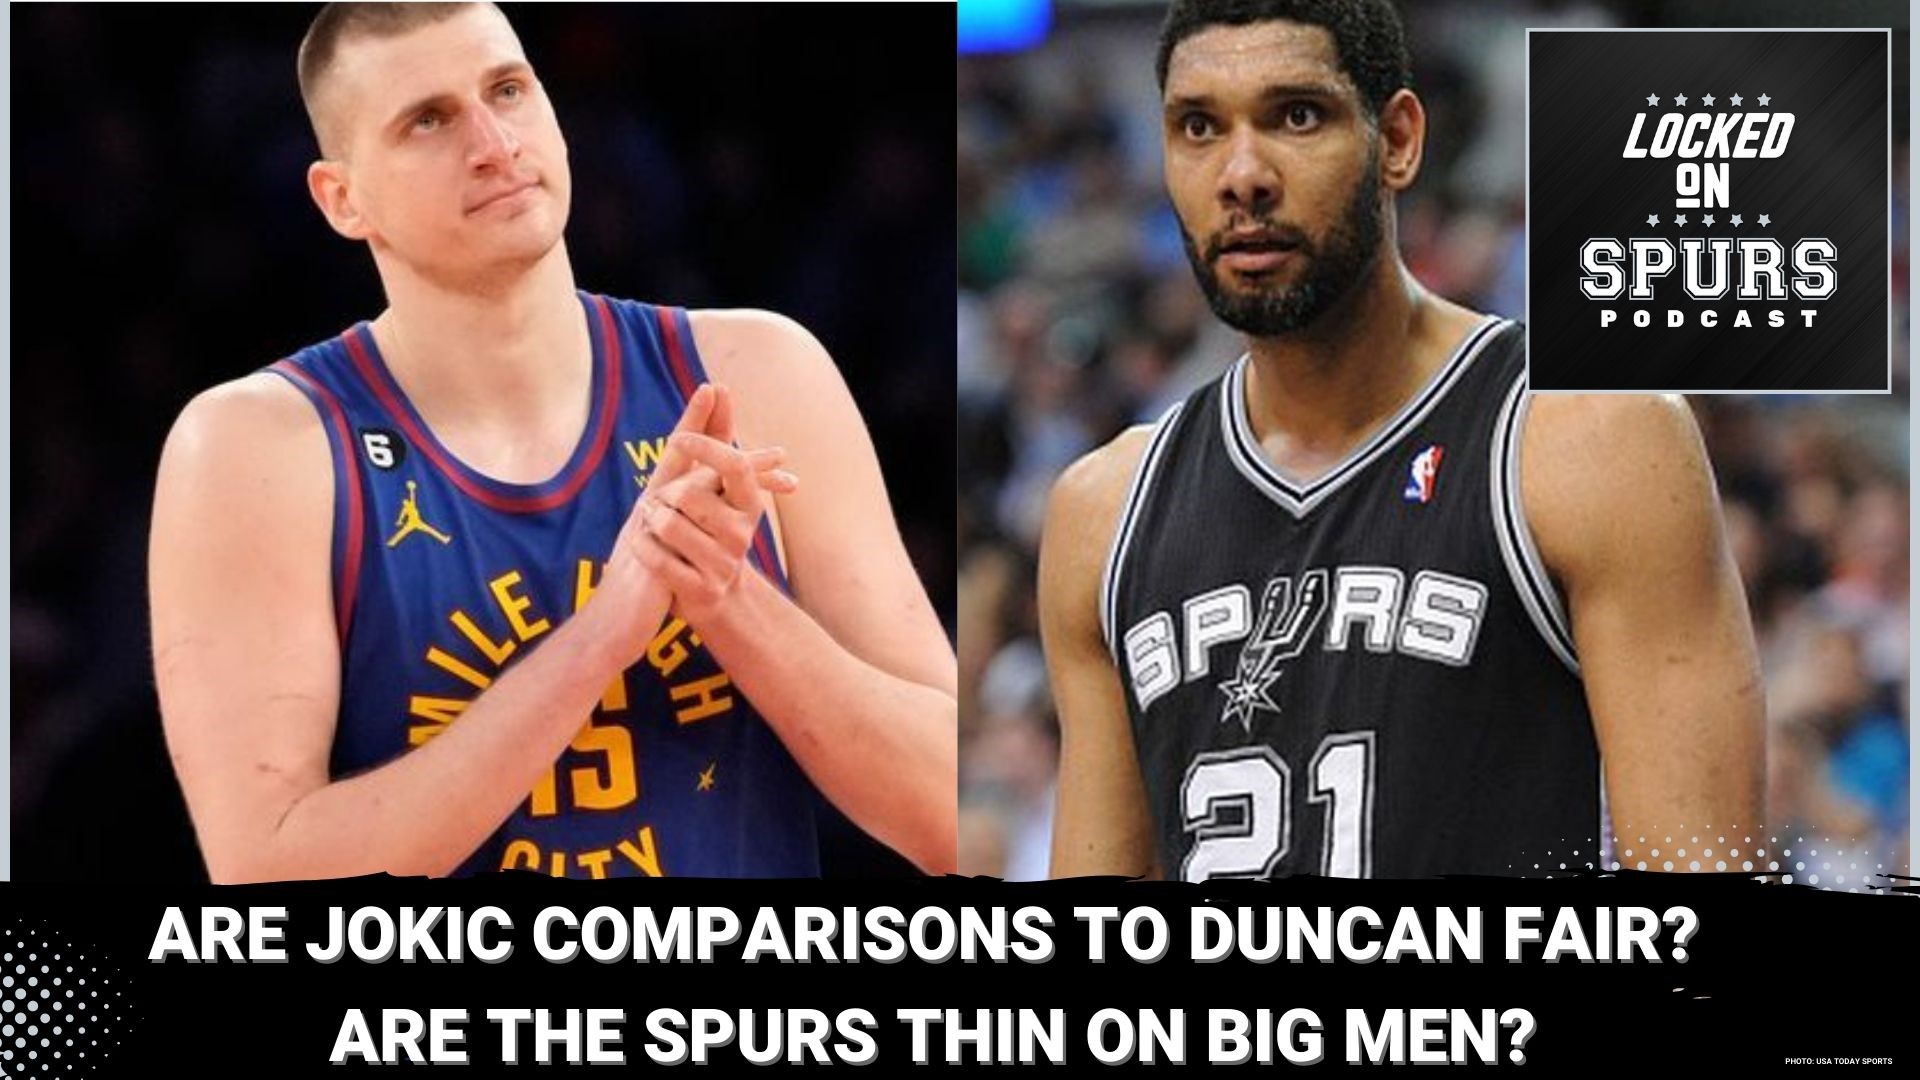 Is it a reach to compare Jokic to Duncan?